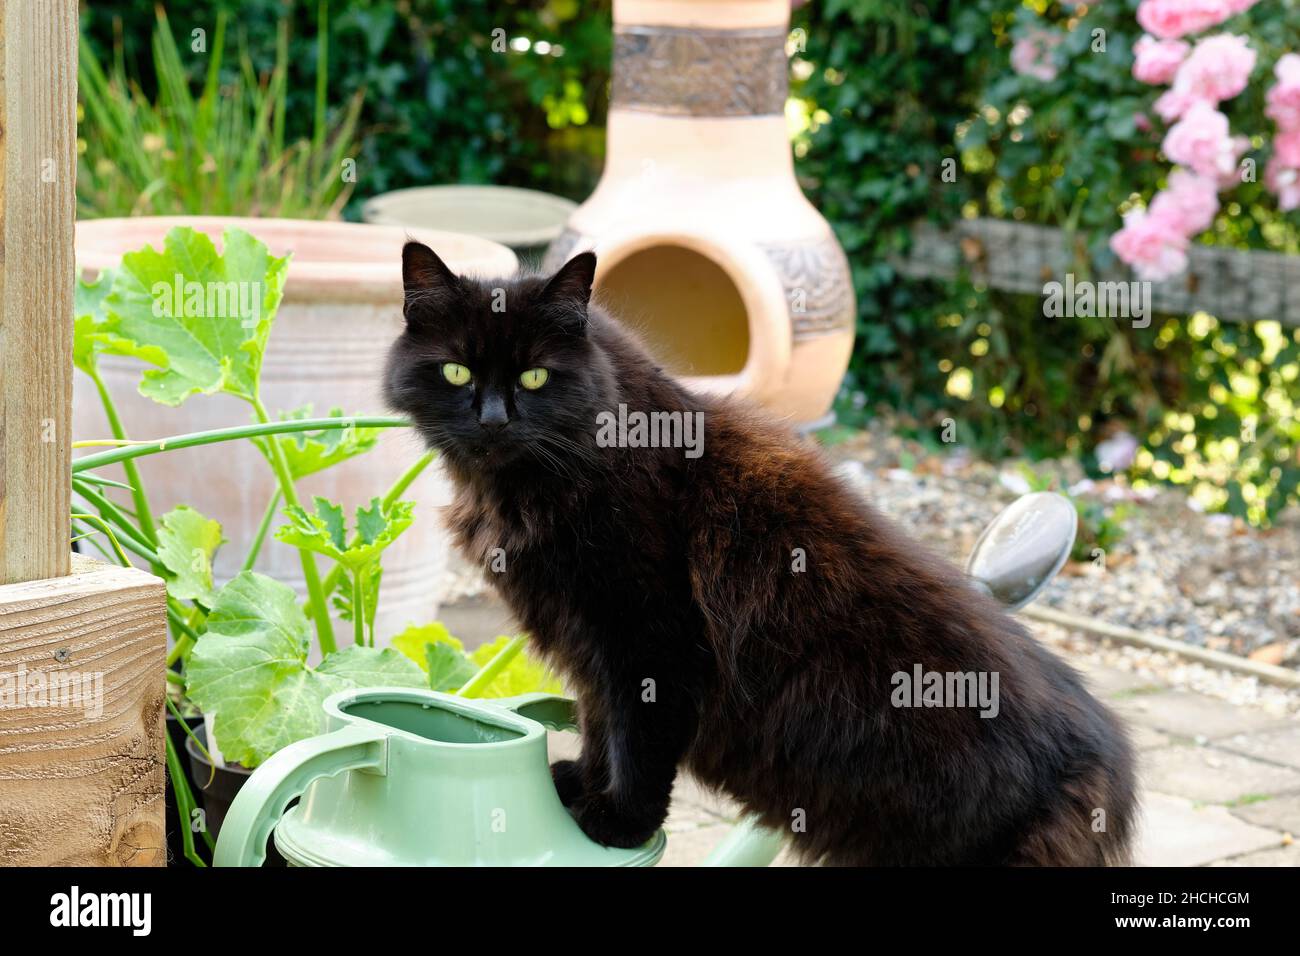 A Black and Brown Domestic Cat, Felis catus, Standing on a Watering Can in a Garden during the Summer. Stock Photo